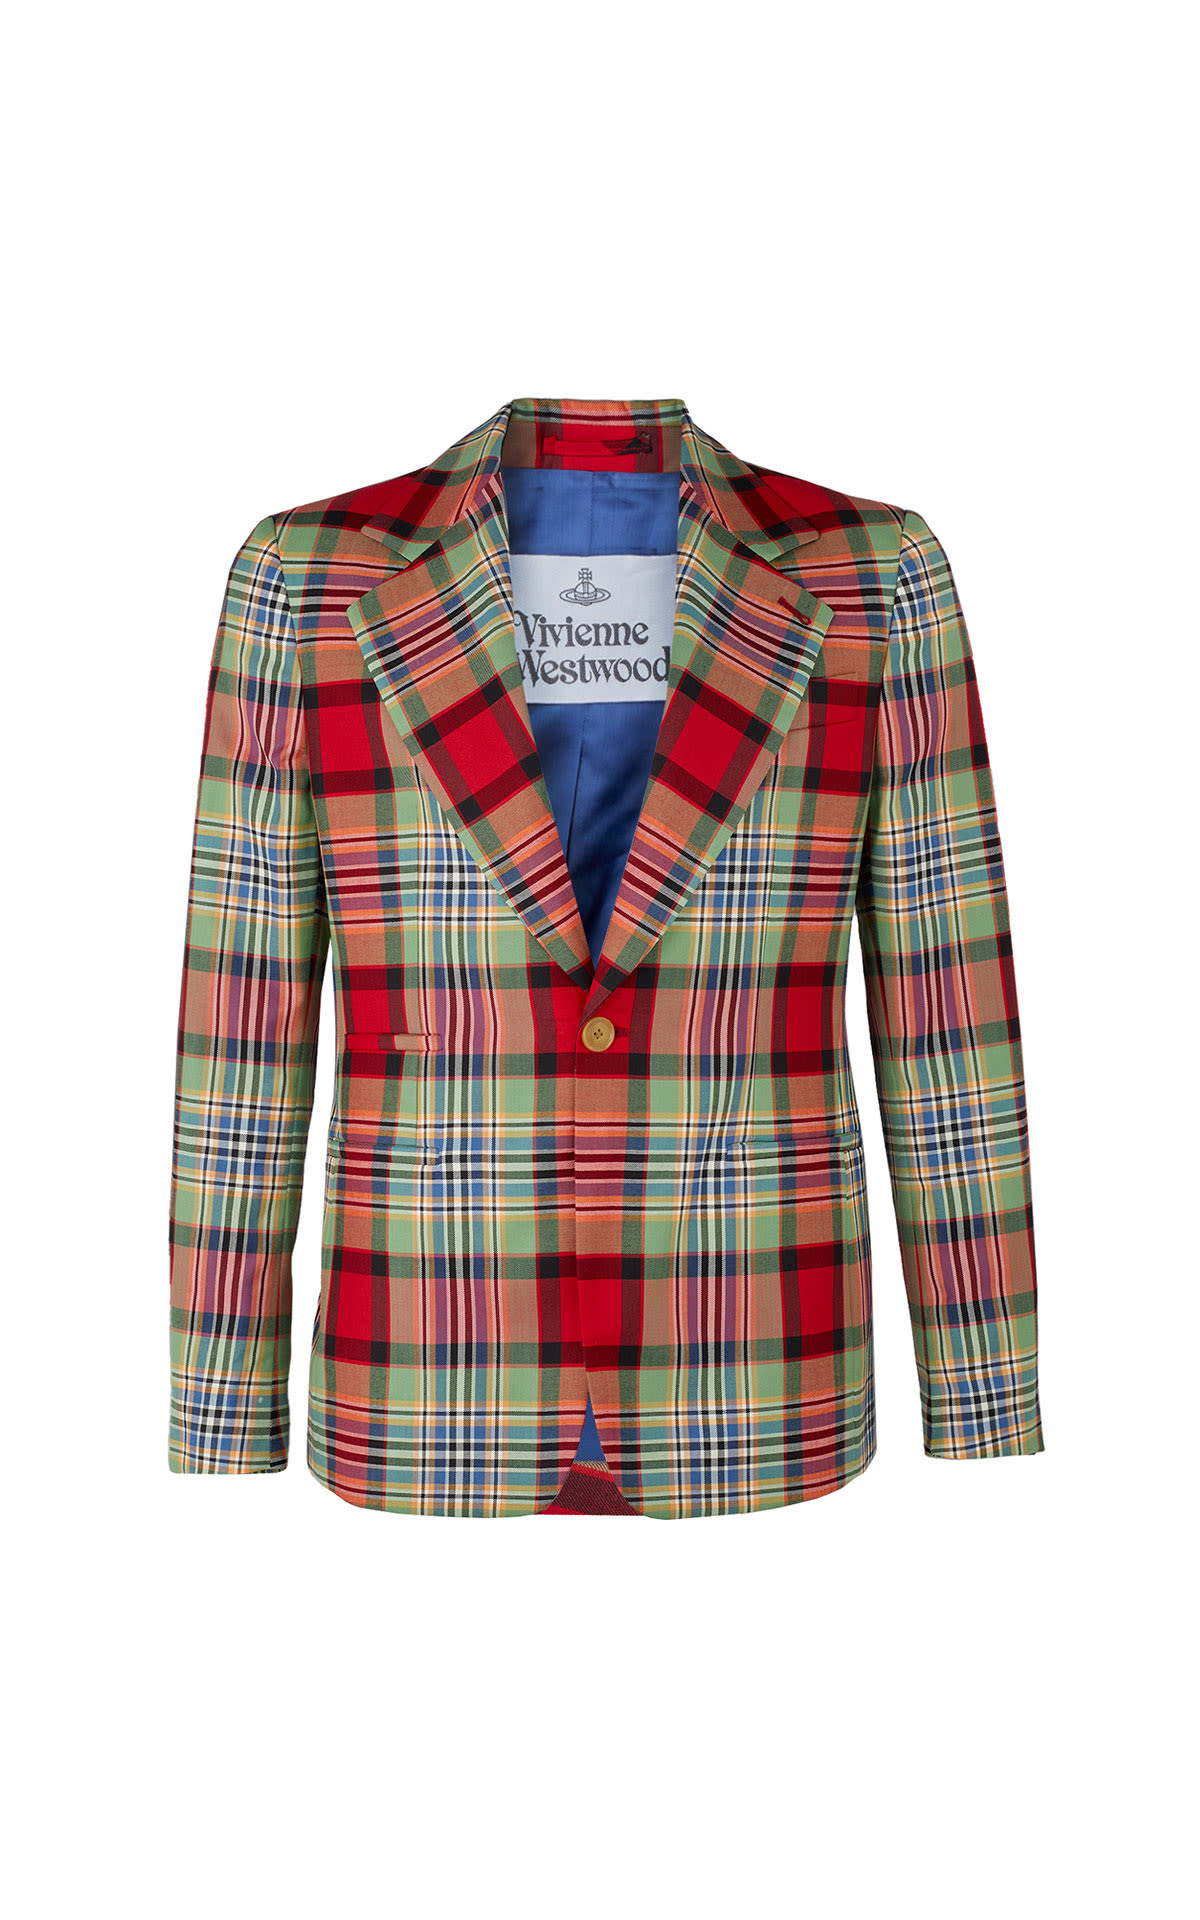 Vivienne Westwood Classic jacket from Bicester Village